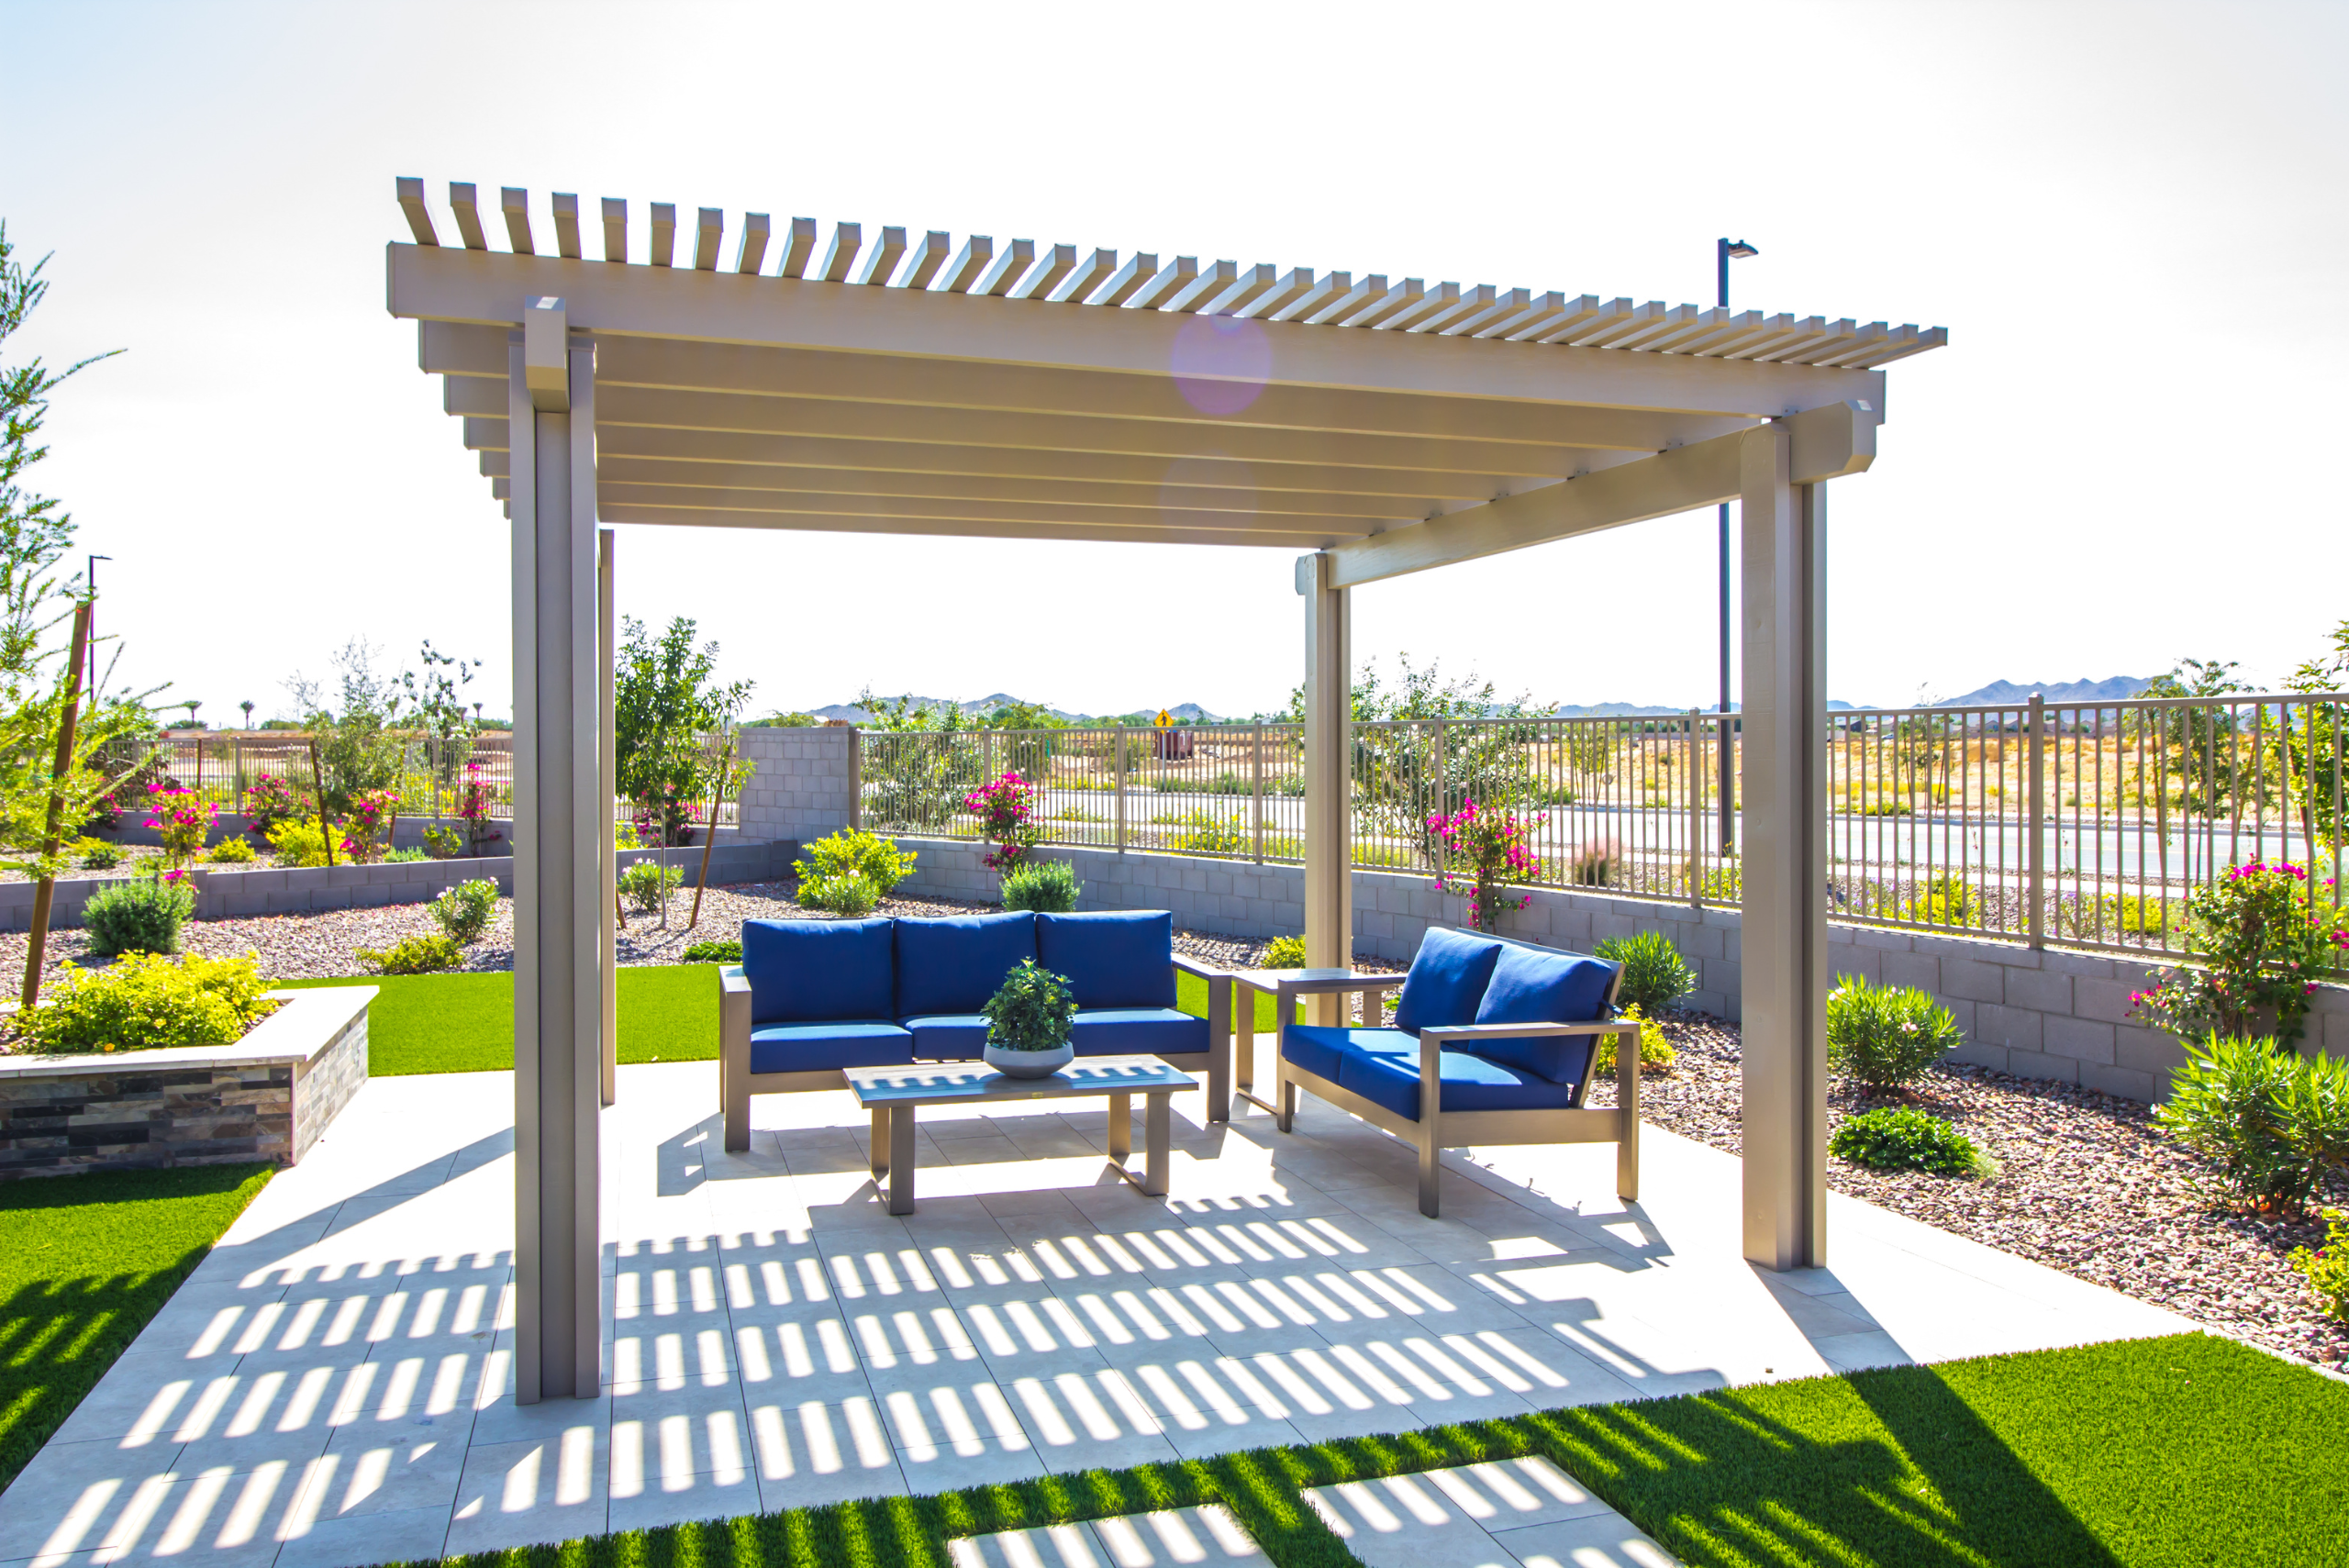 Wooden pergola on a concrete slap, covering outdoor furniture.